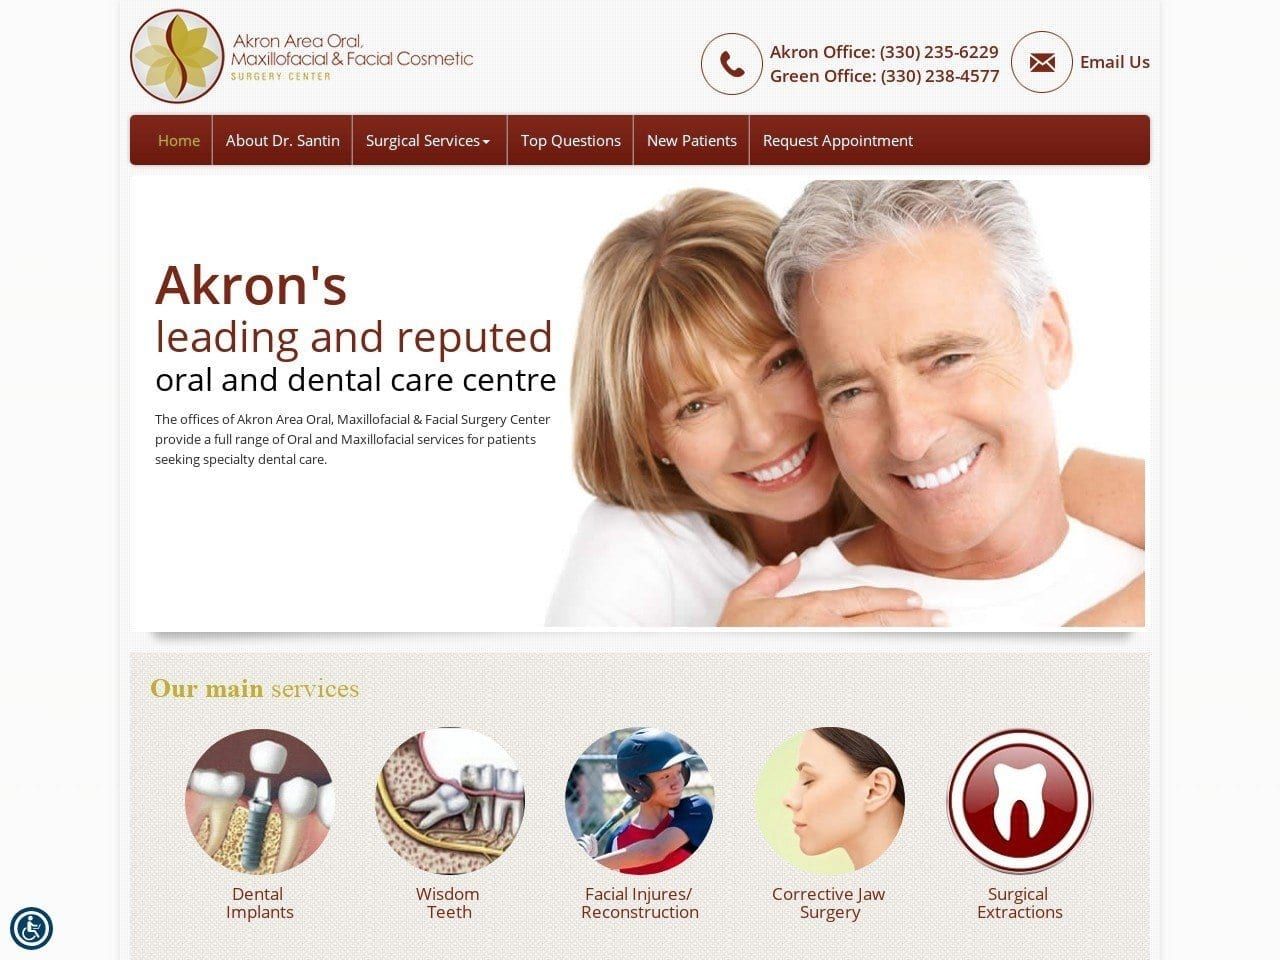 Akron Area Oral Website Screenshot from akronoralsurgery.com